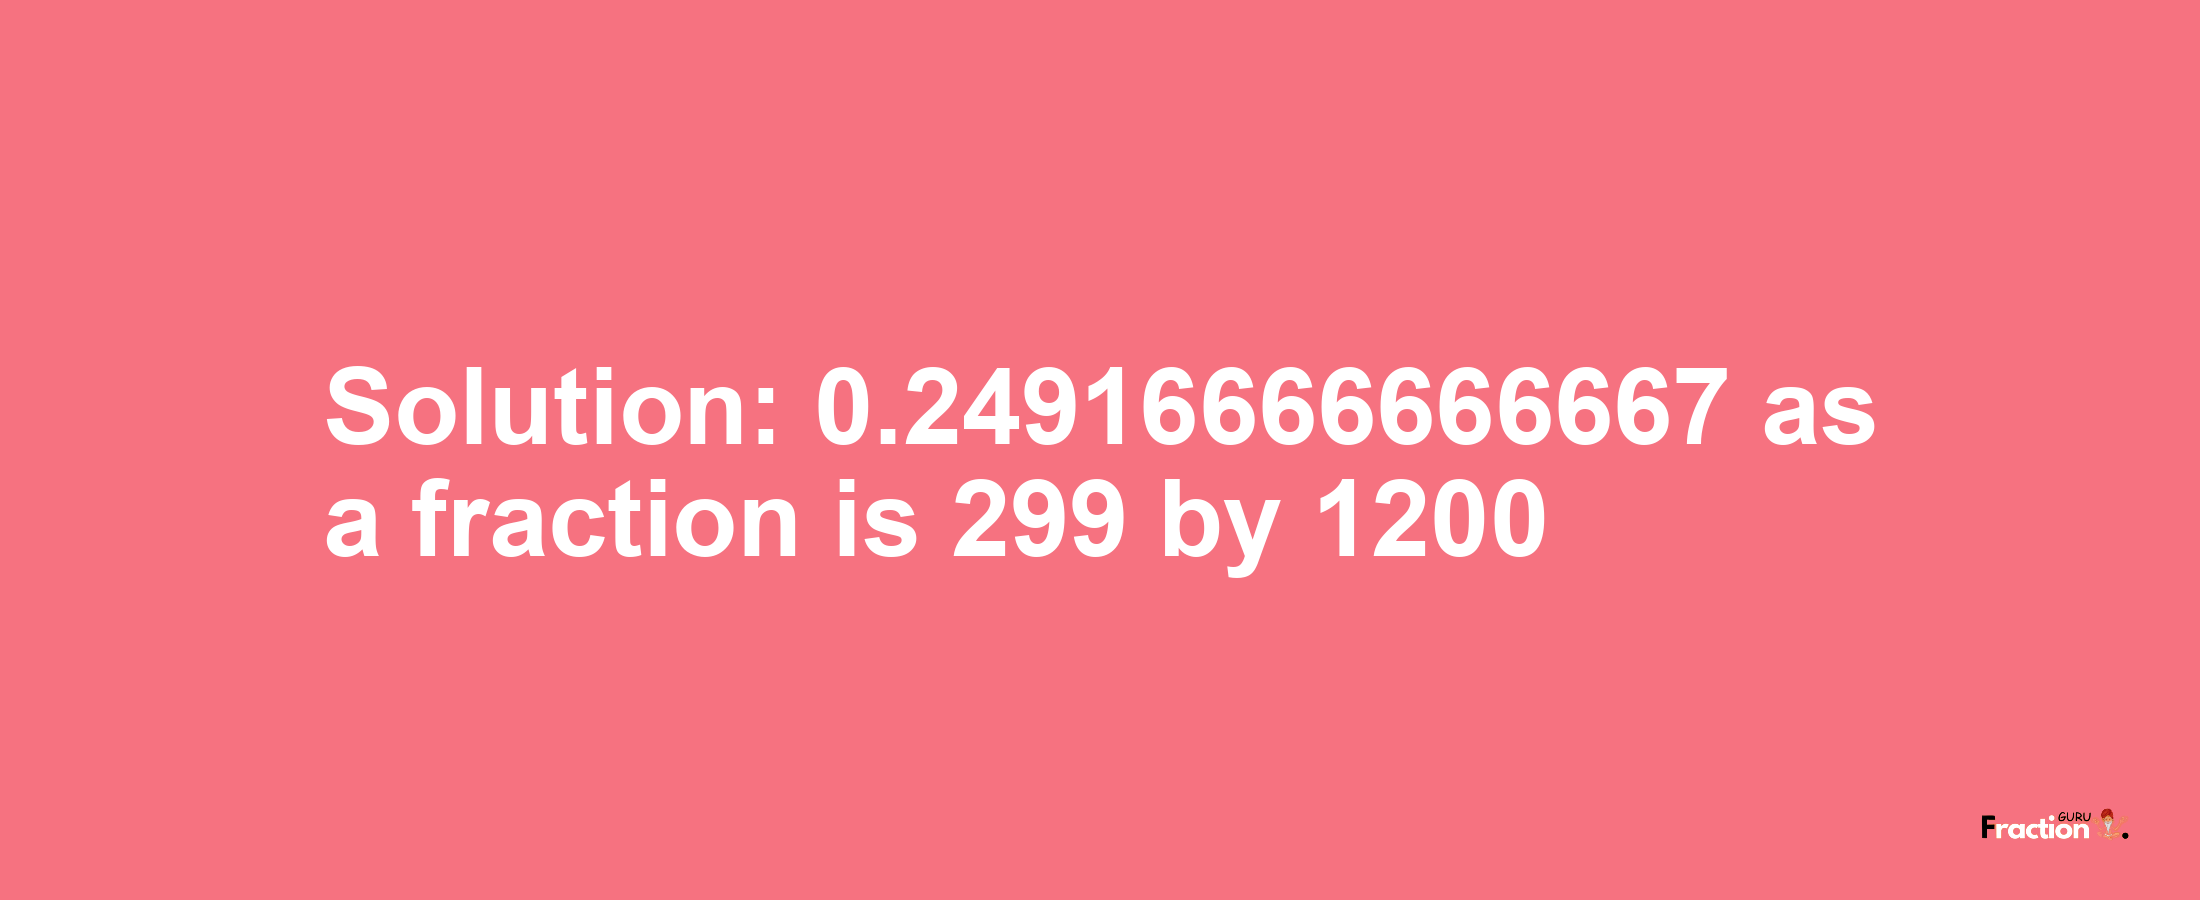 Solution:0.24916666666667 as a fraction is 299/1200